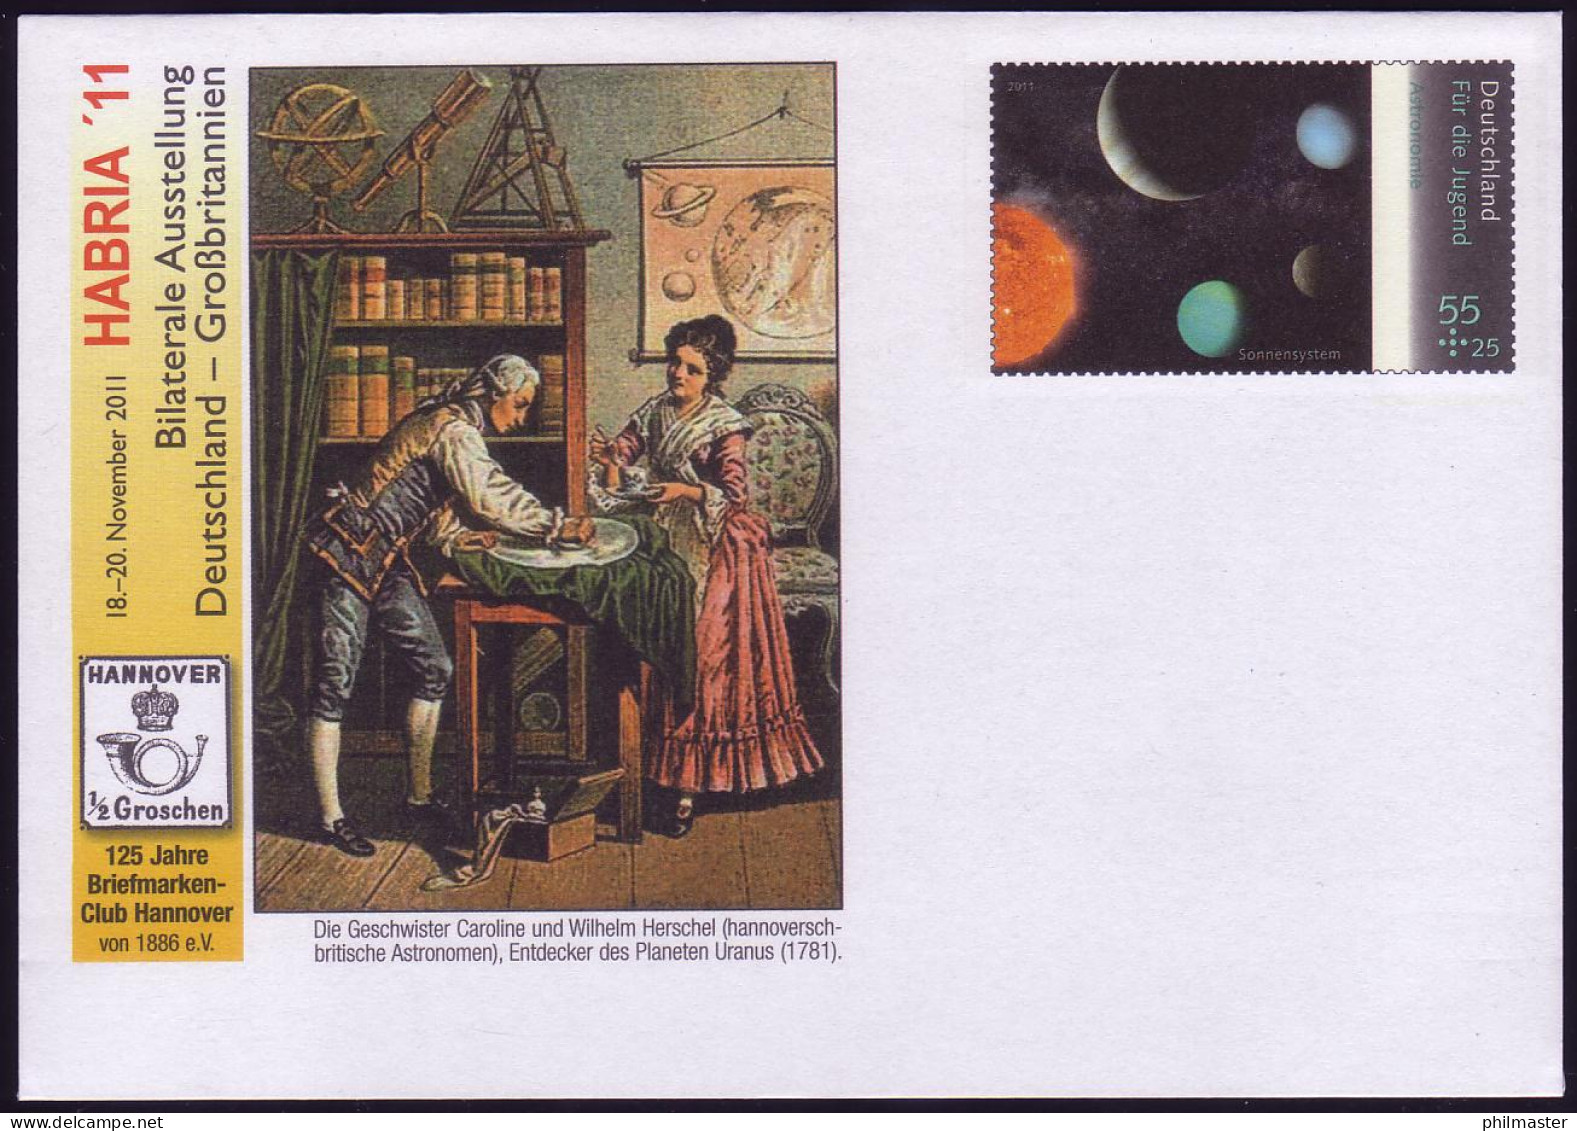 USo 251 Briefmarkenausstellung HABRIA Hannover 2011, ** - Covers - Mint